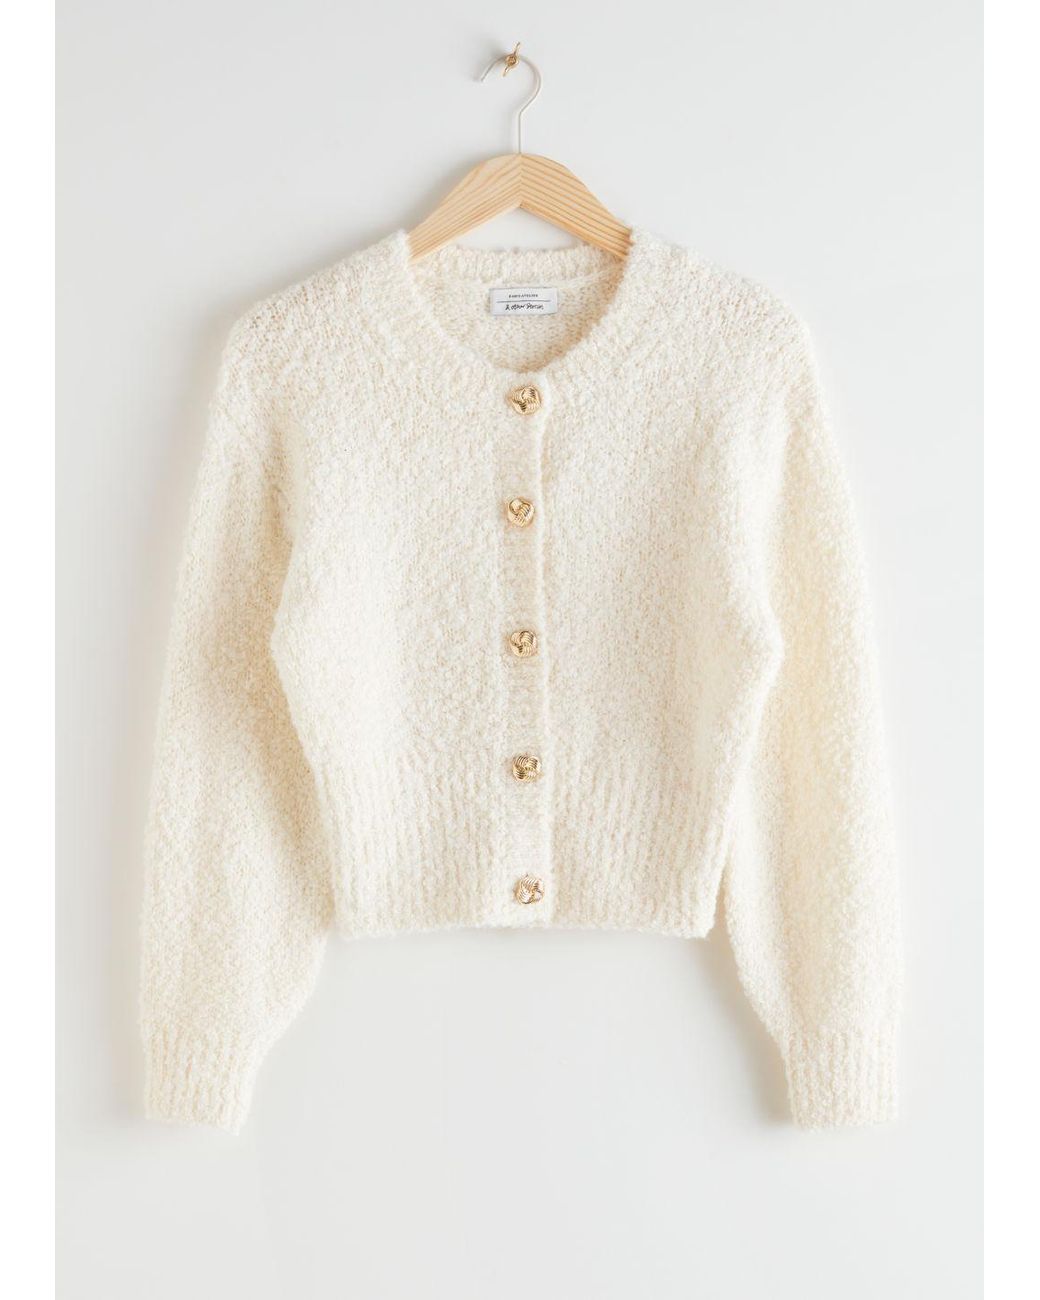 & Other Stories Bouclé Knit Cropped Cardigan in White | Lyst